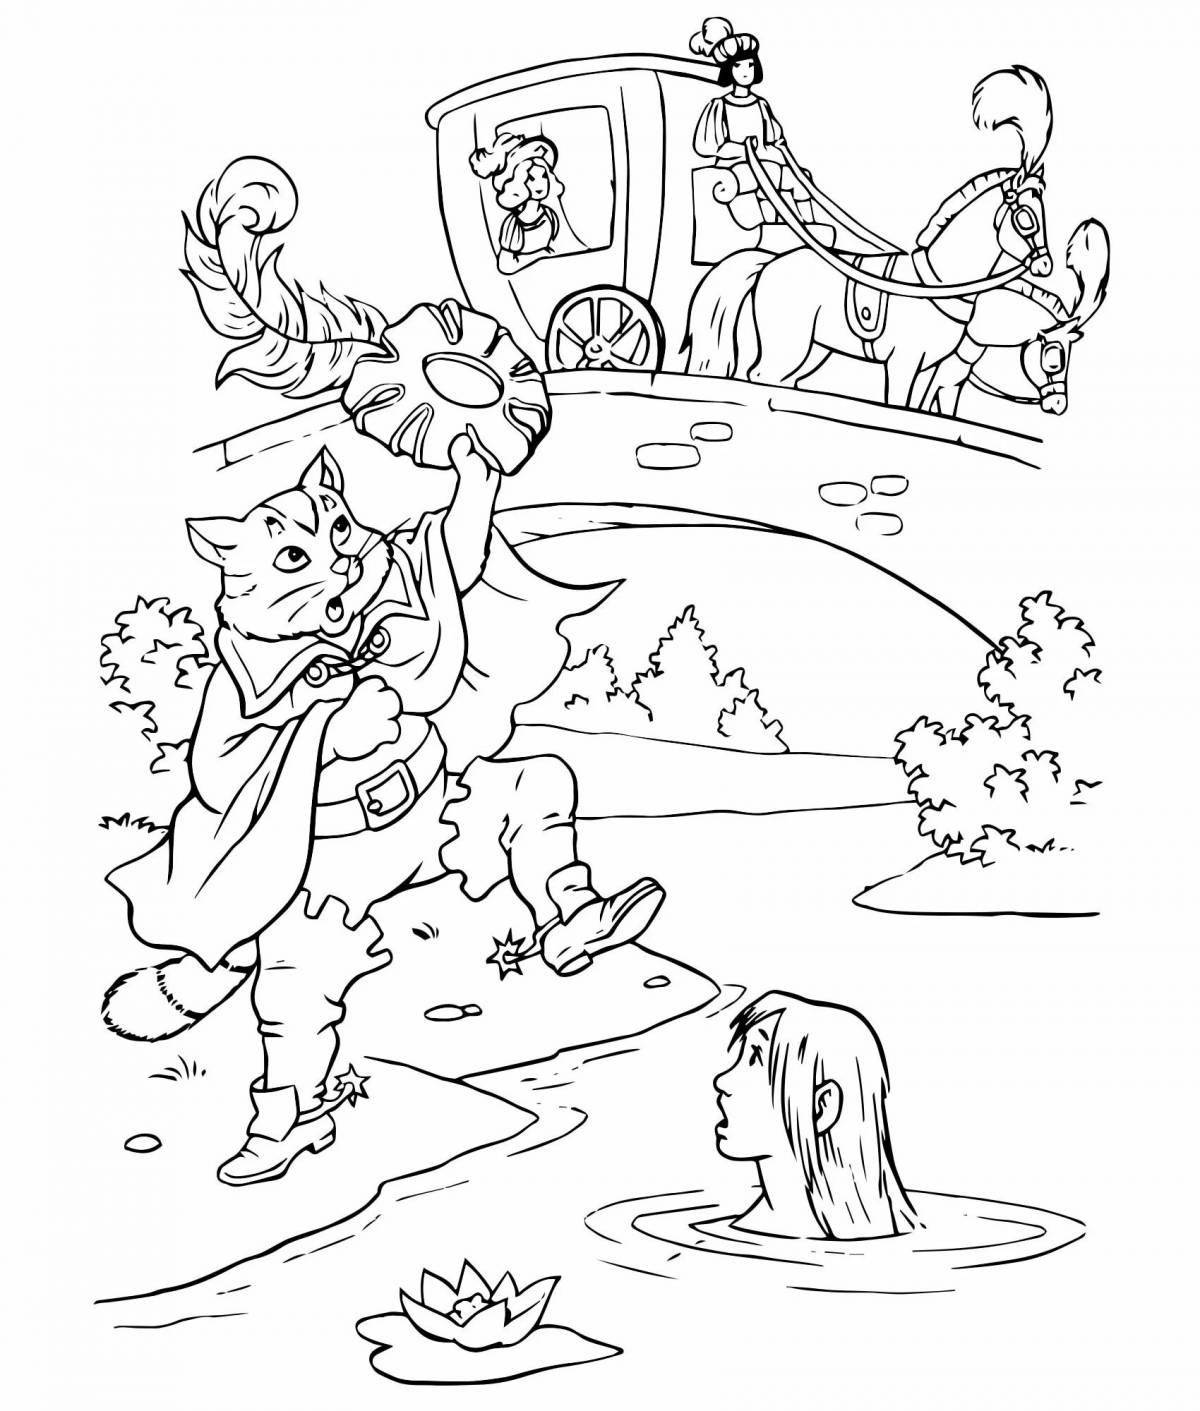 Sh perro awesome coloring page